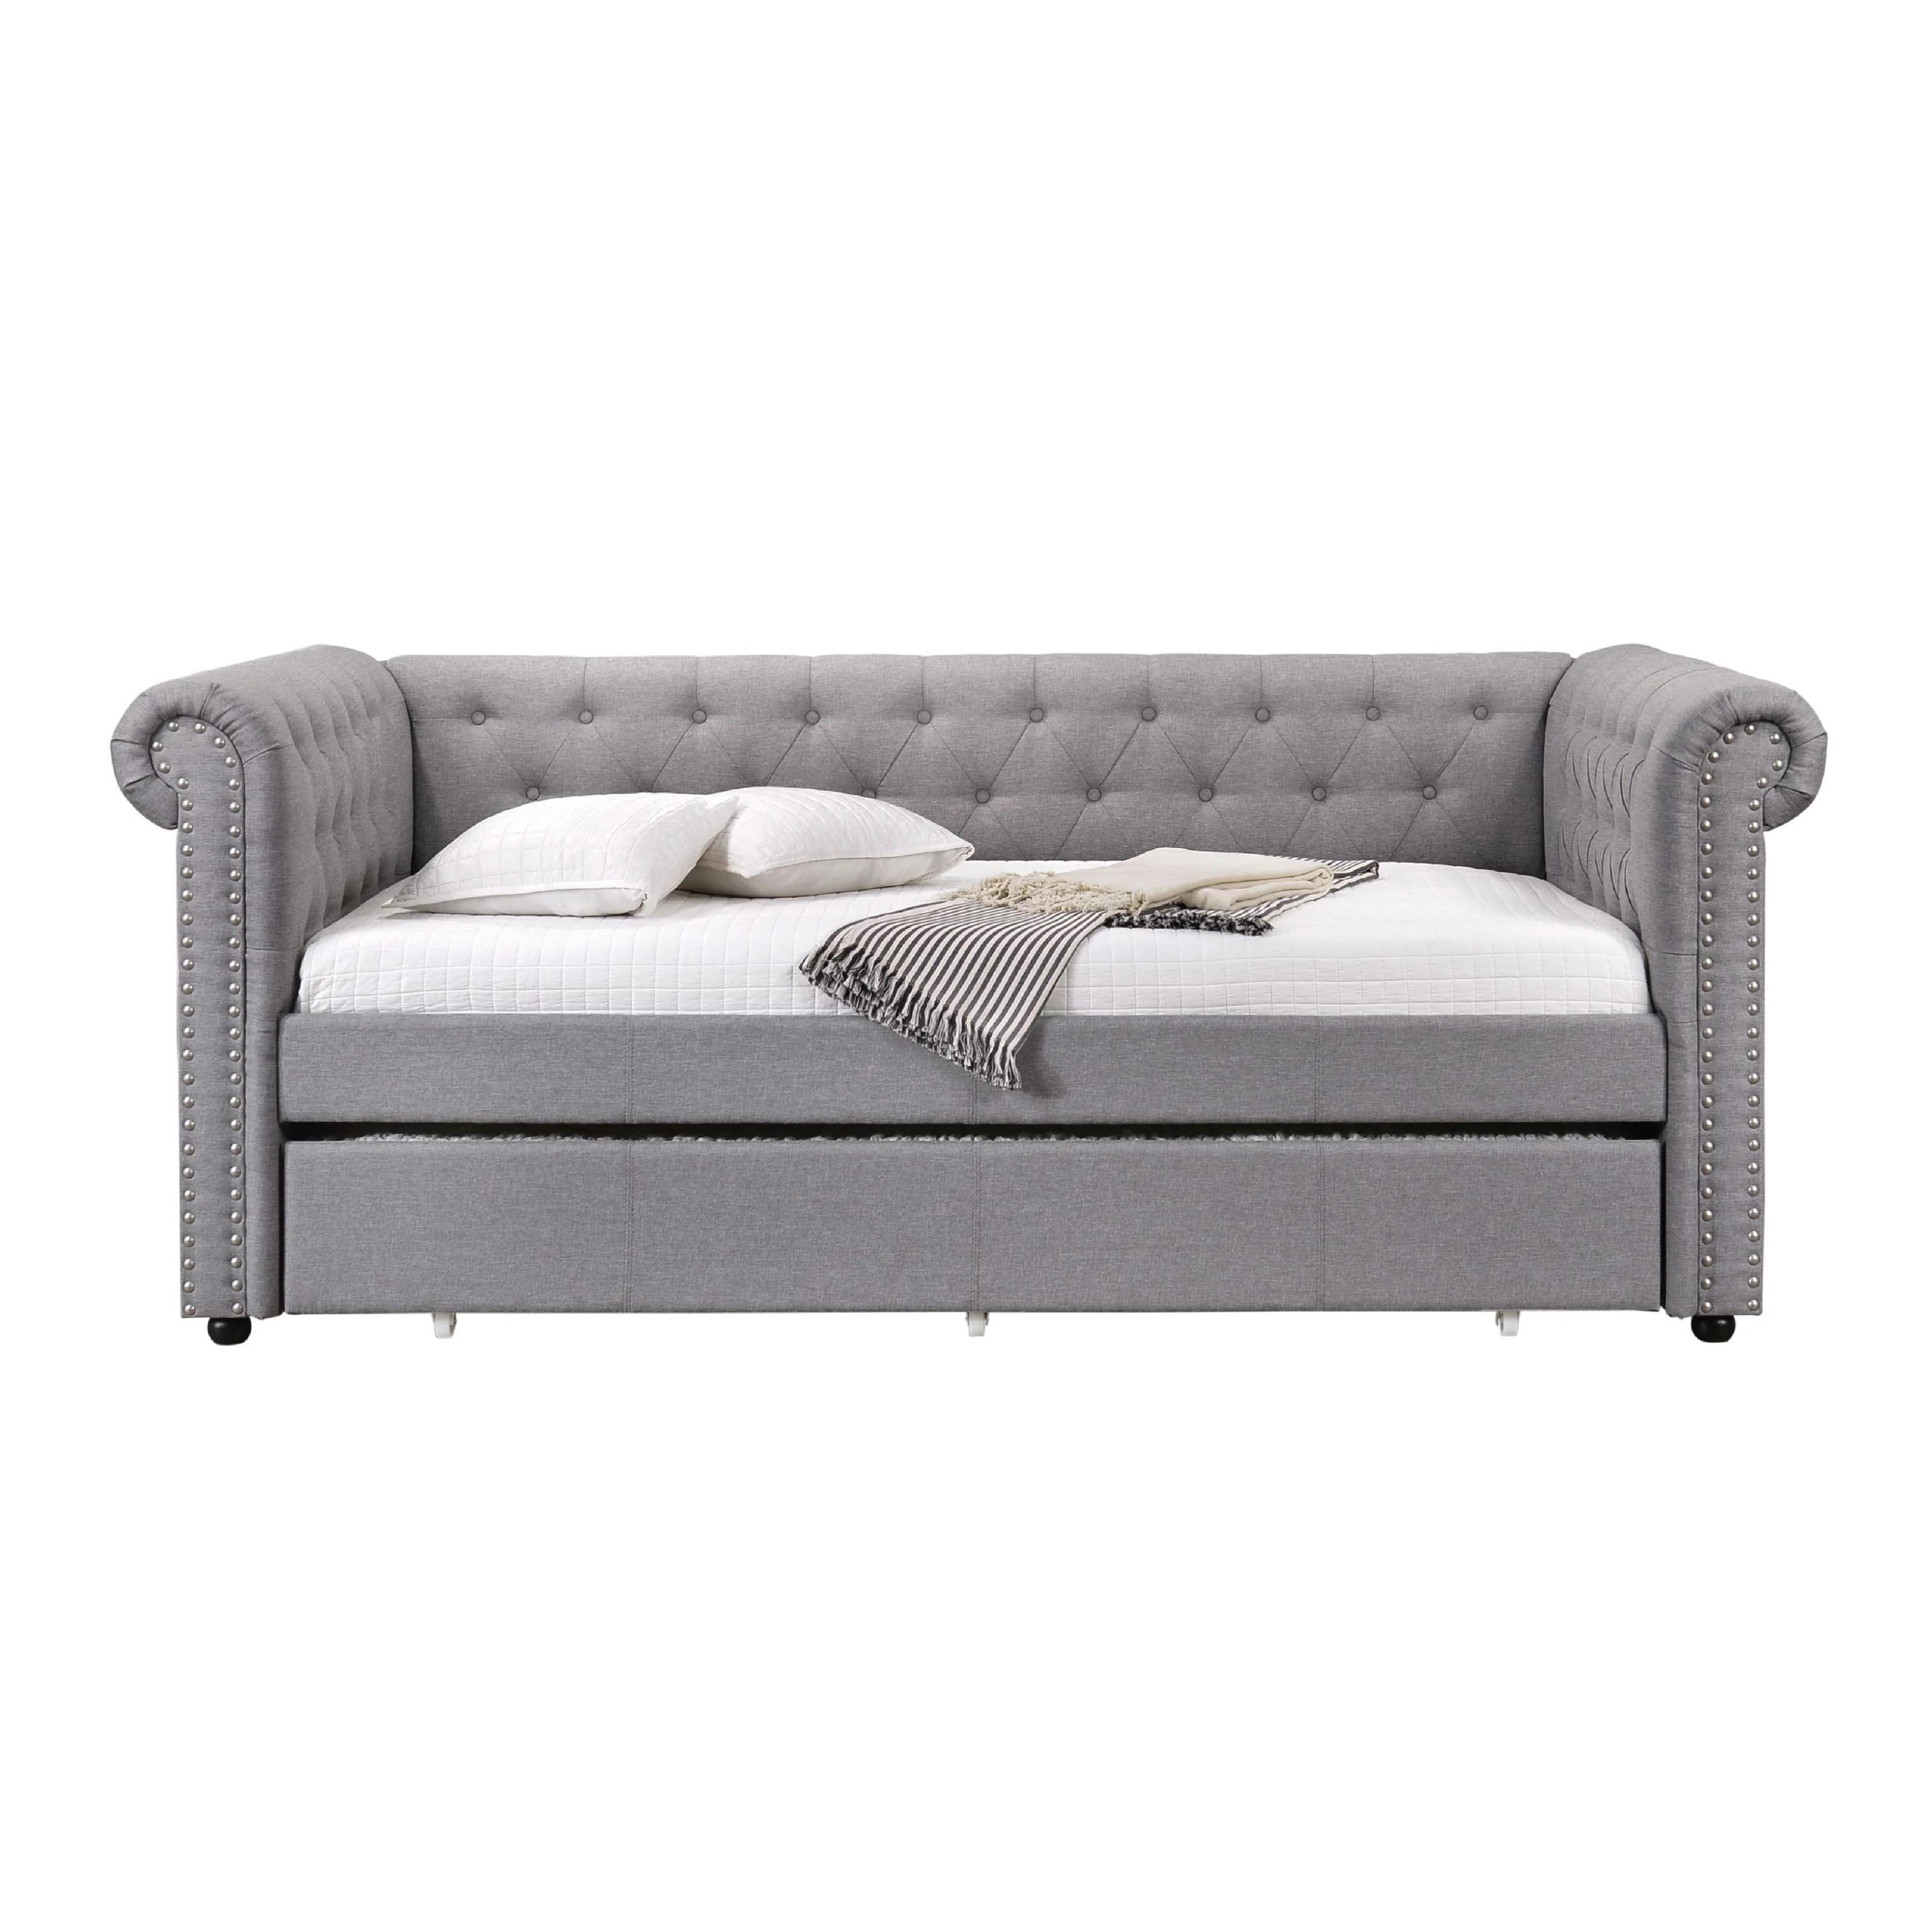 Traditional,  Vintage Daybed w/ trundle Justice 39405 in Gray Finish 